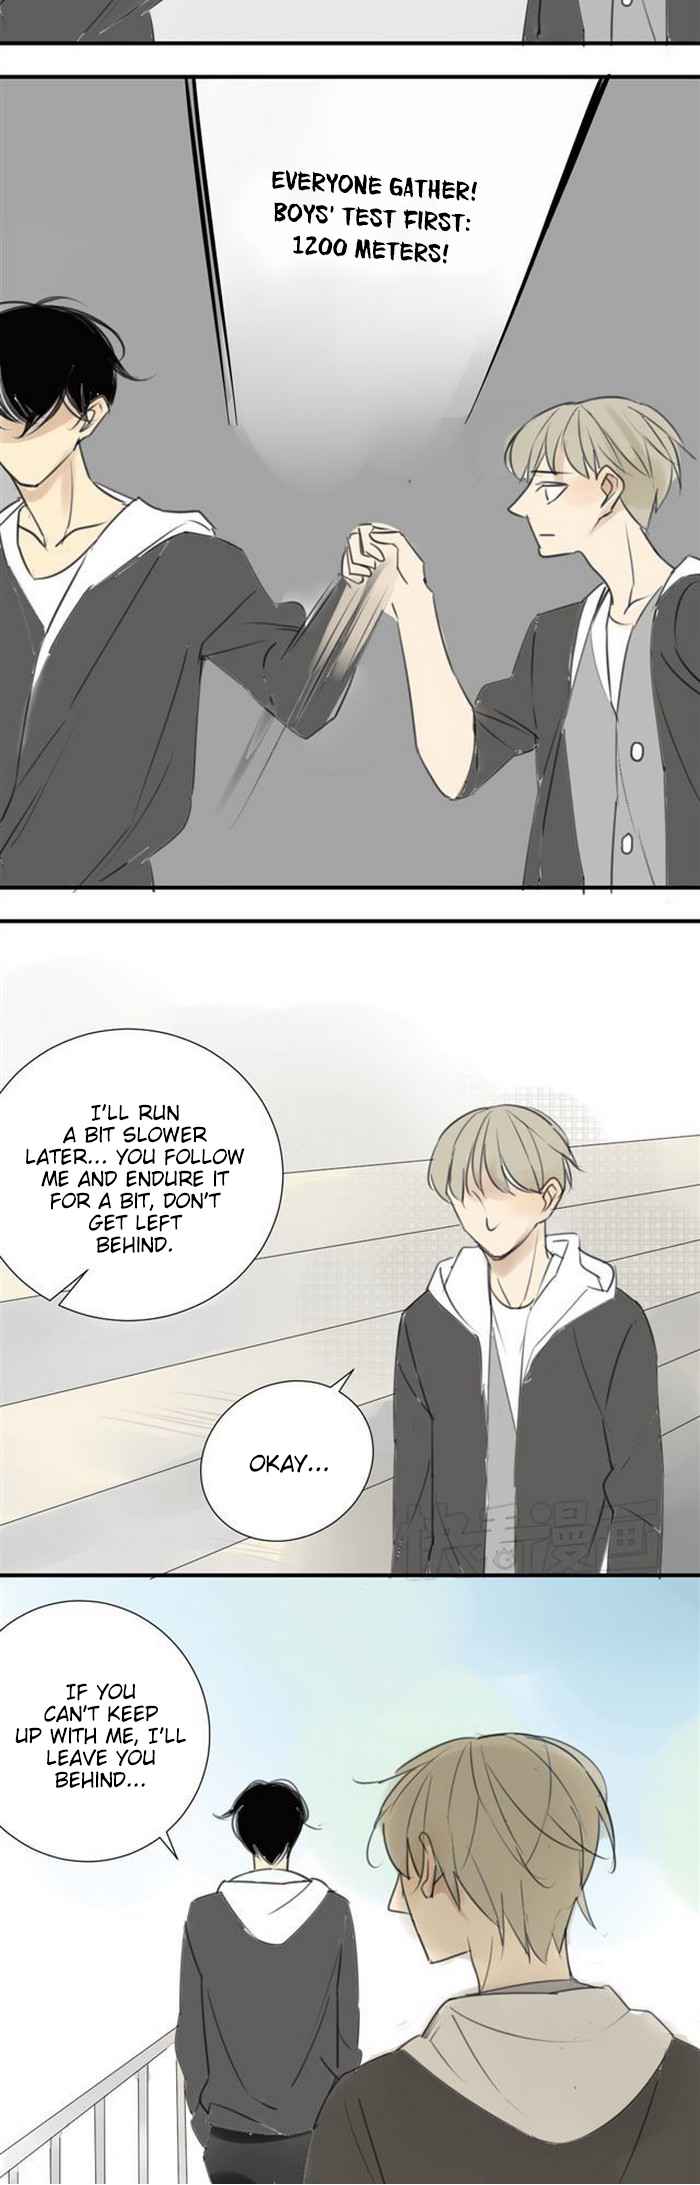 Classmate Relationship? Ch. 39 If You Can't Keep Up With Me Then I Won't Wait For You